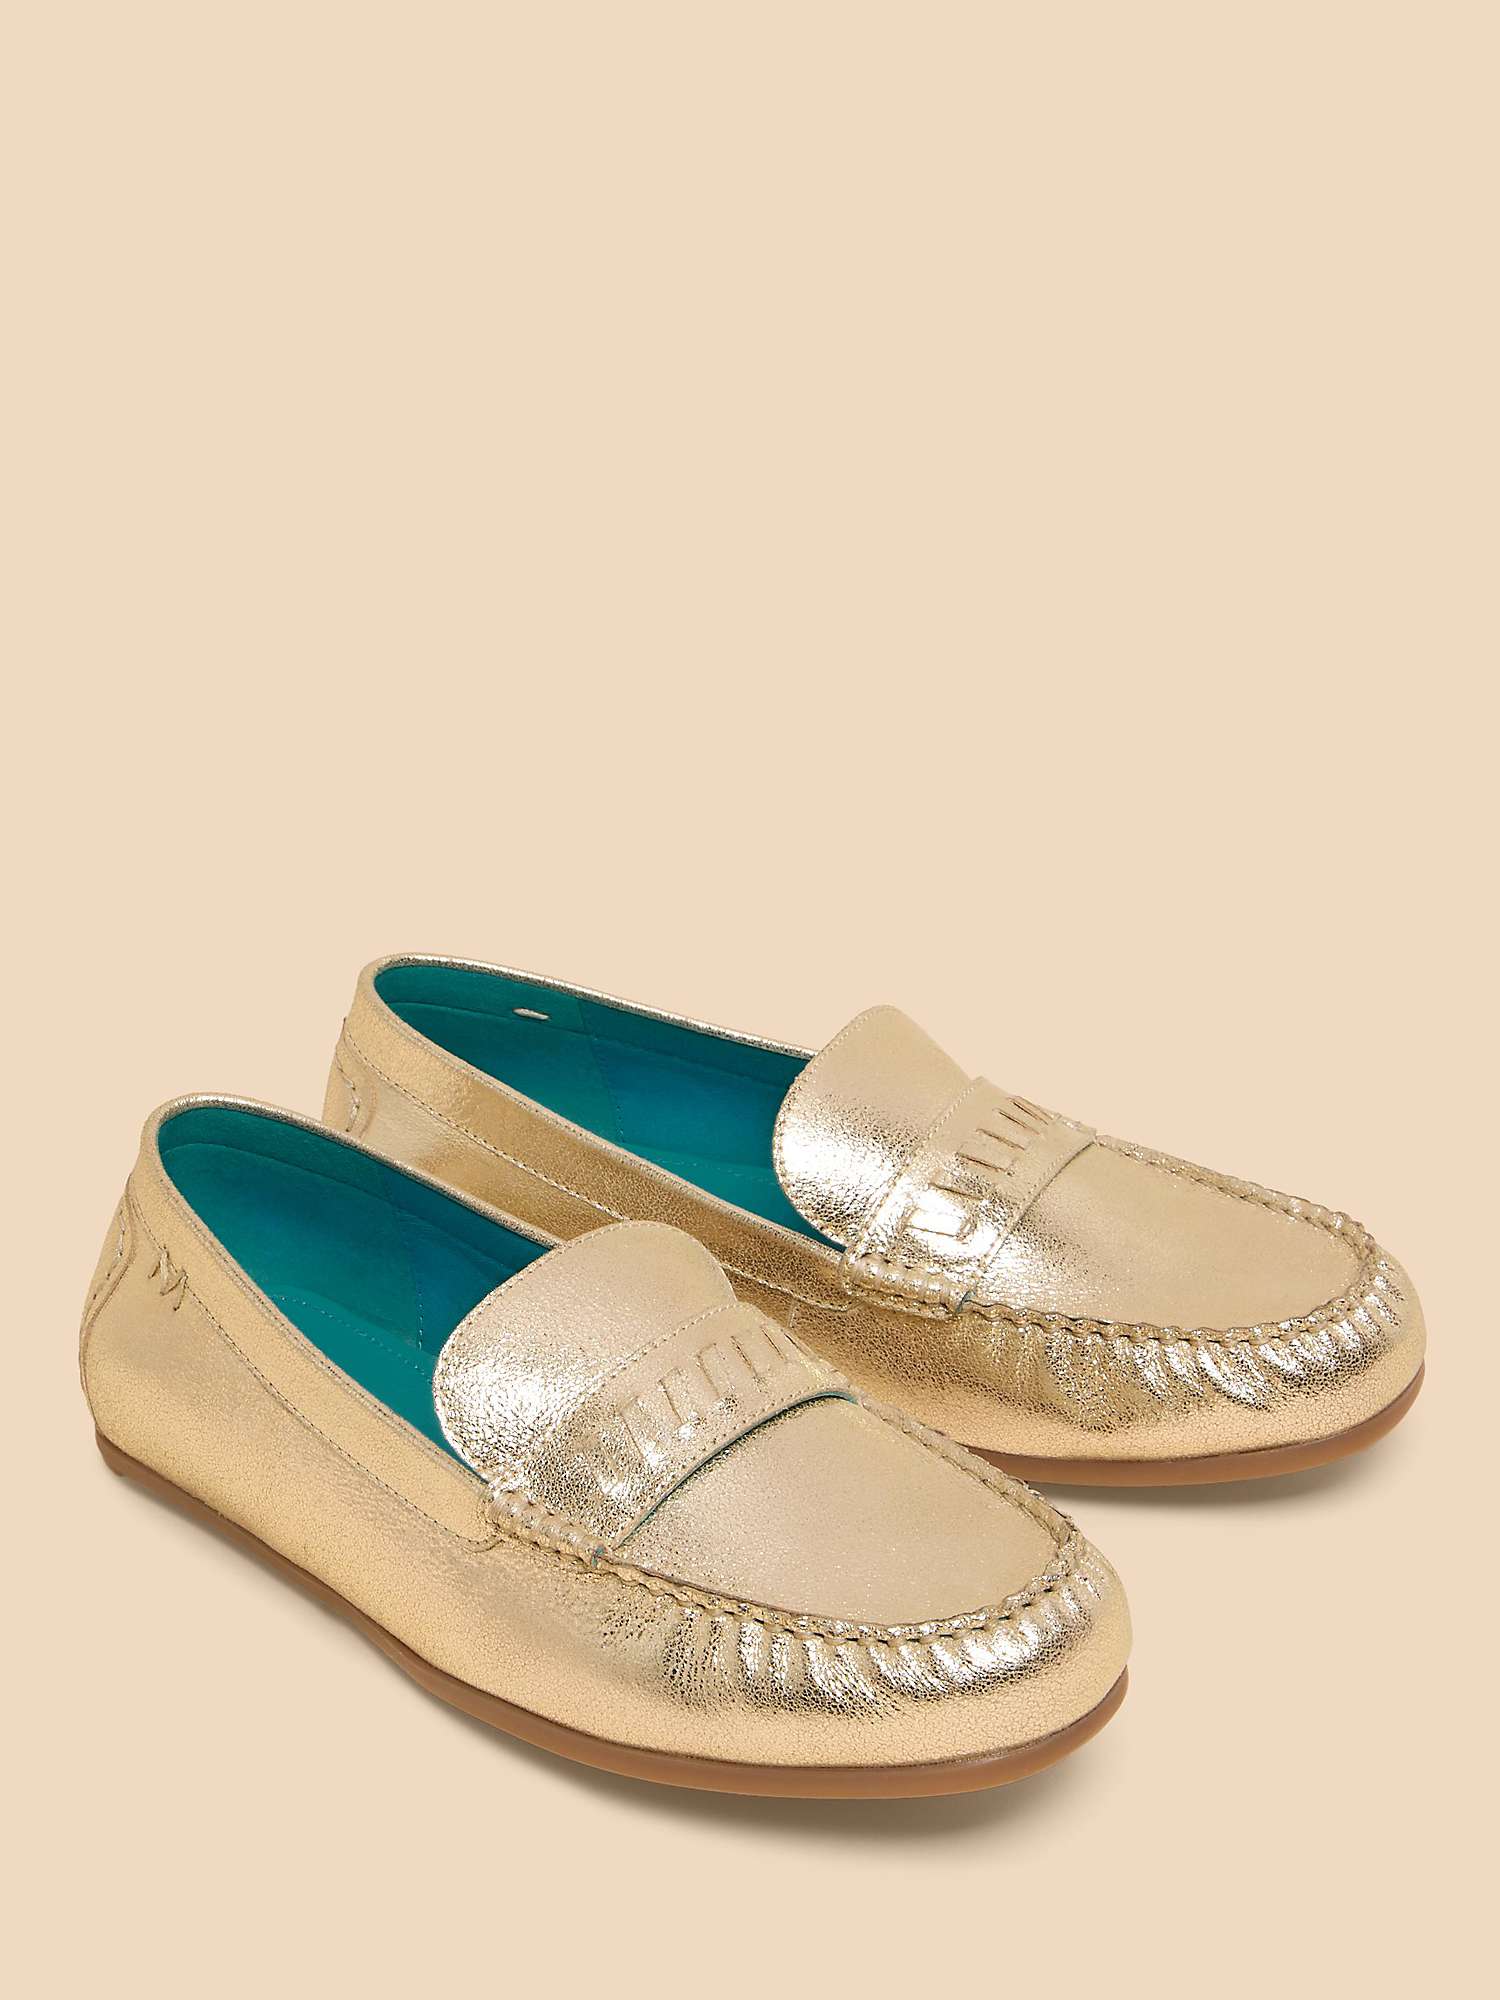 Buy White Stuff Mayflower Leather Moccasins, Gold Online at johnlewis.com